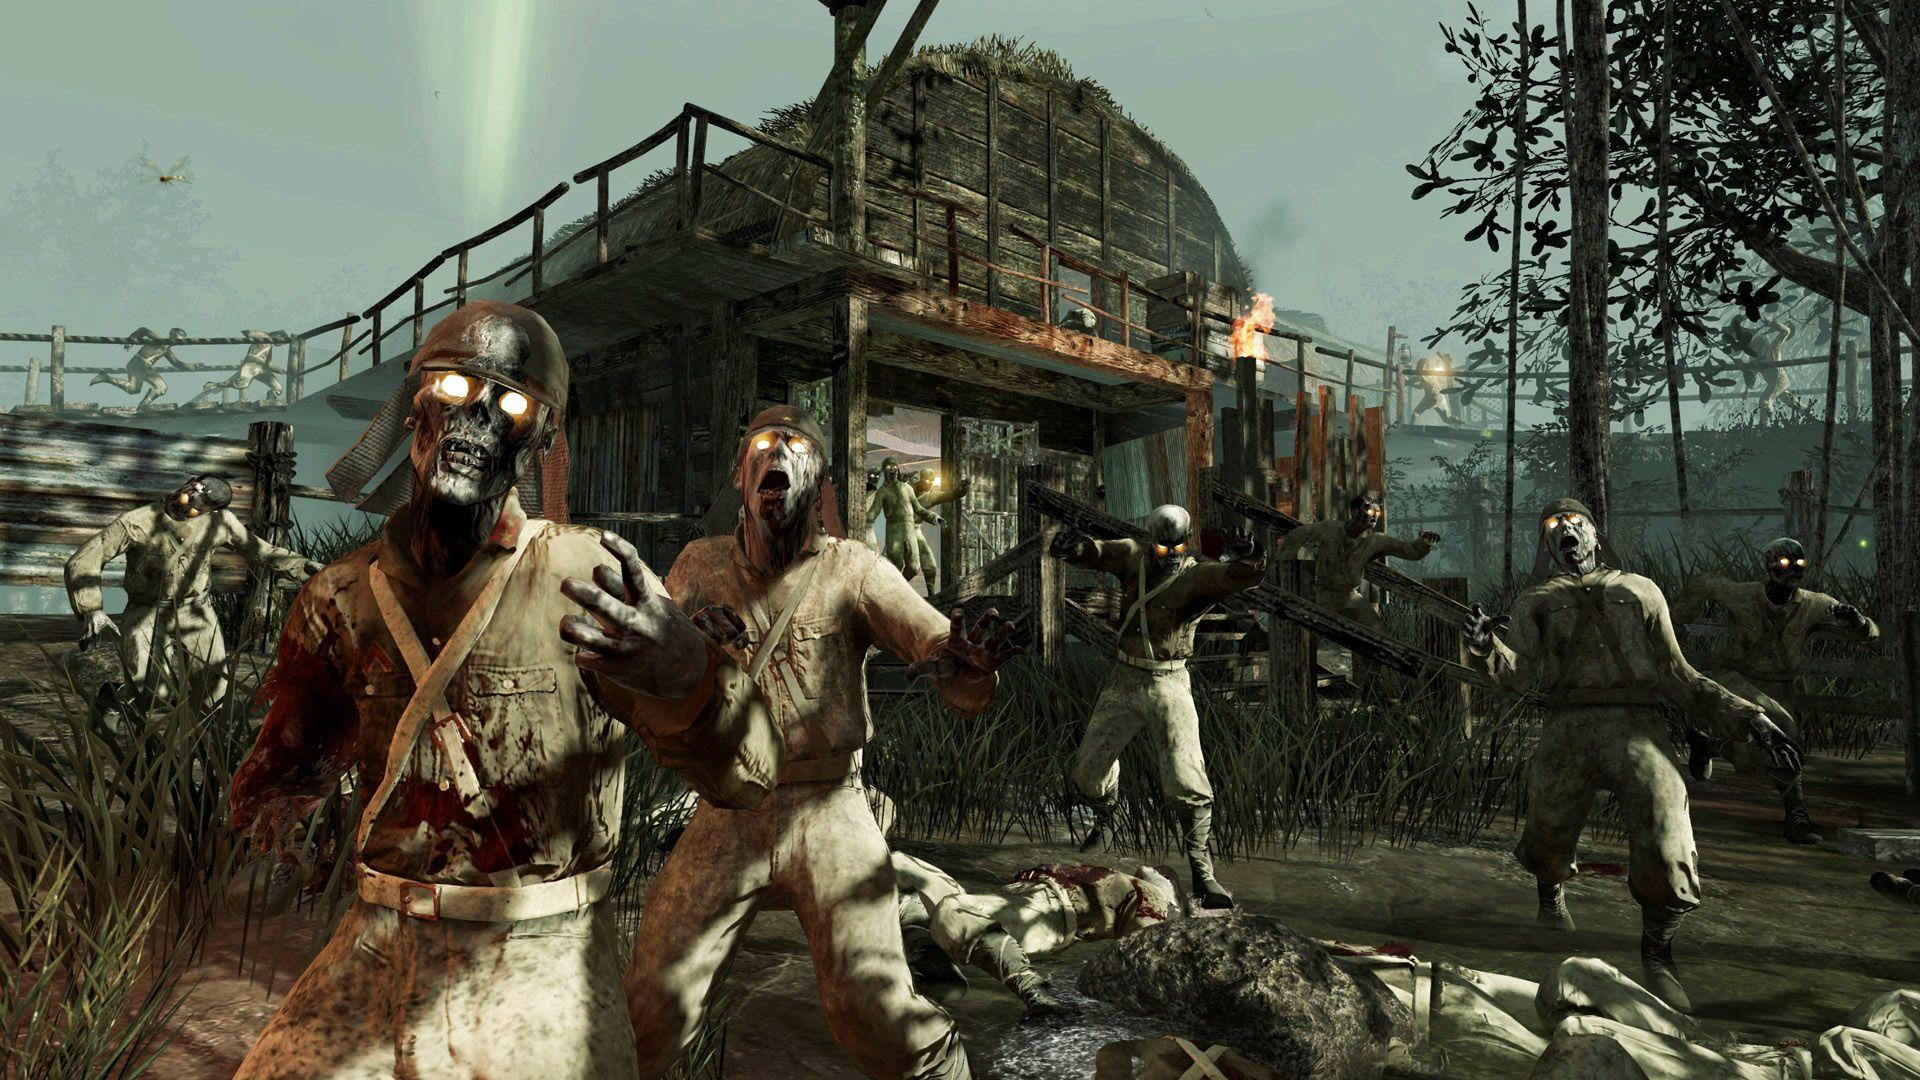 call of duty zombies free download pc